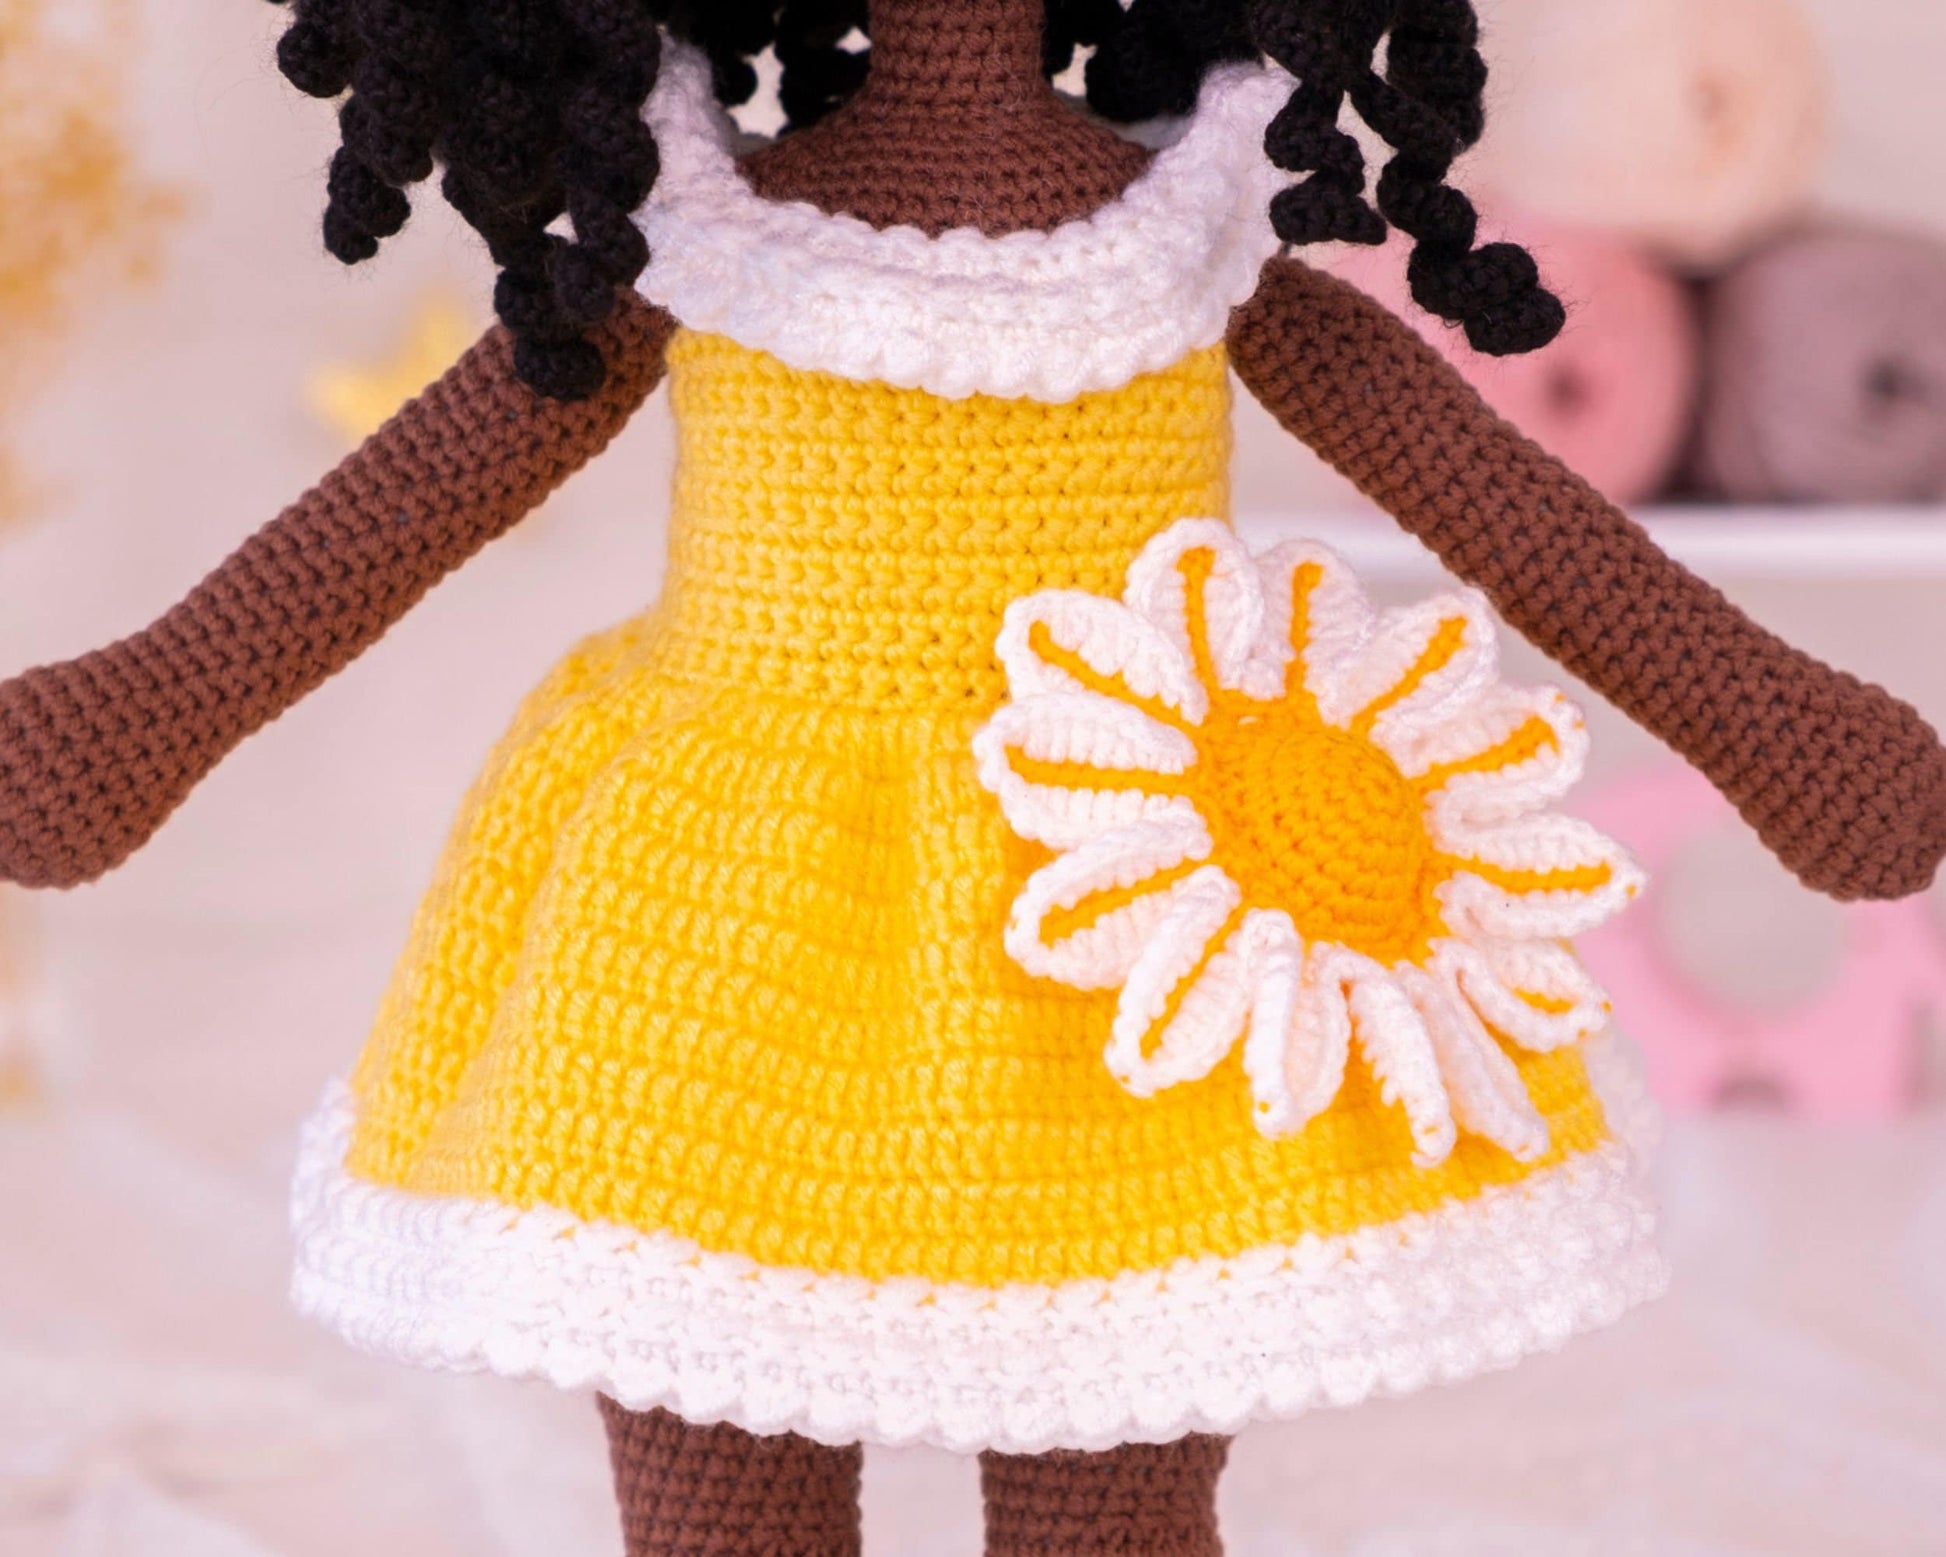 Crochet Doll Black Girl, Curly Hair Doll, Amigurumi Doll, Granddaughter Gift, Daughter Gift, Christmas Doll, Knitted Dolls, Yellow Doll